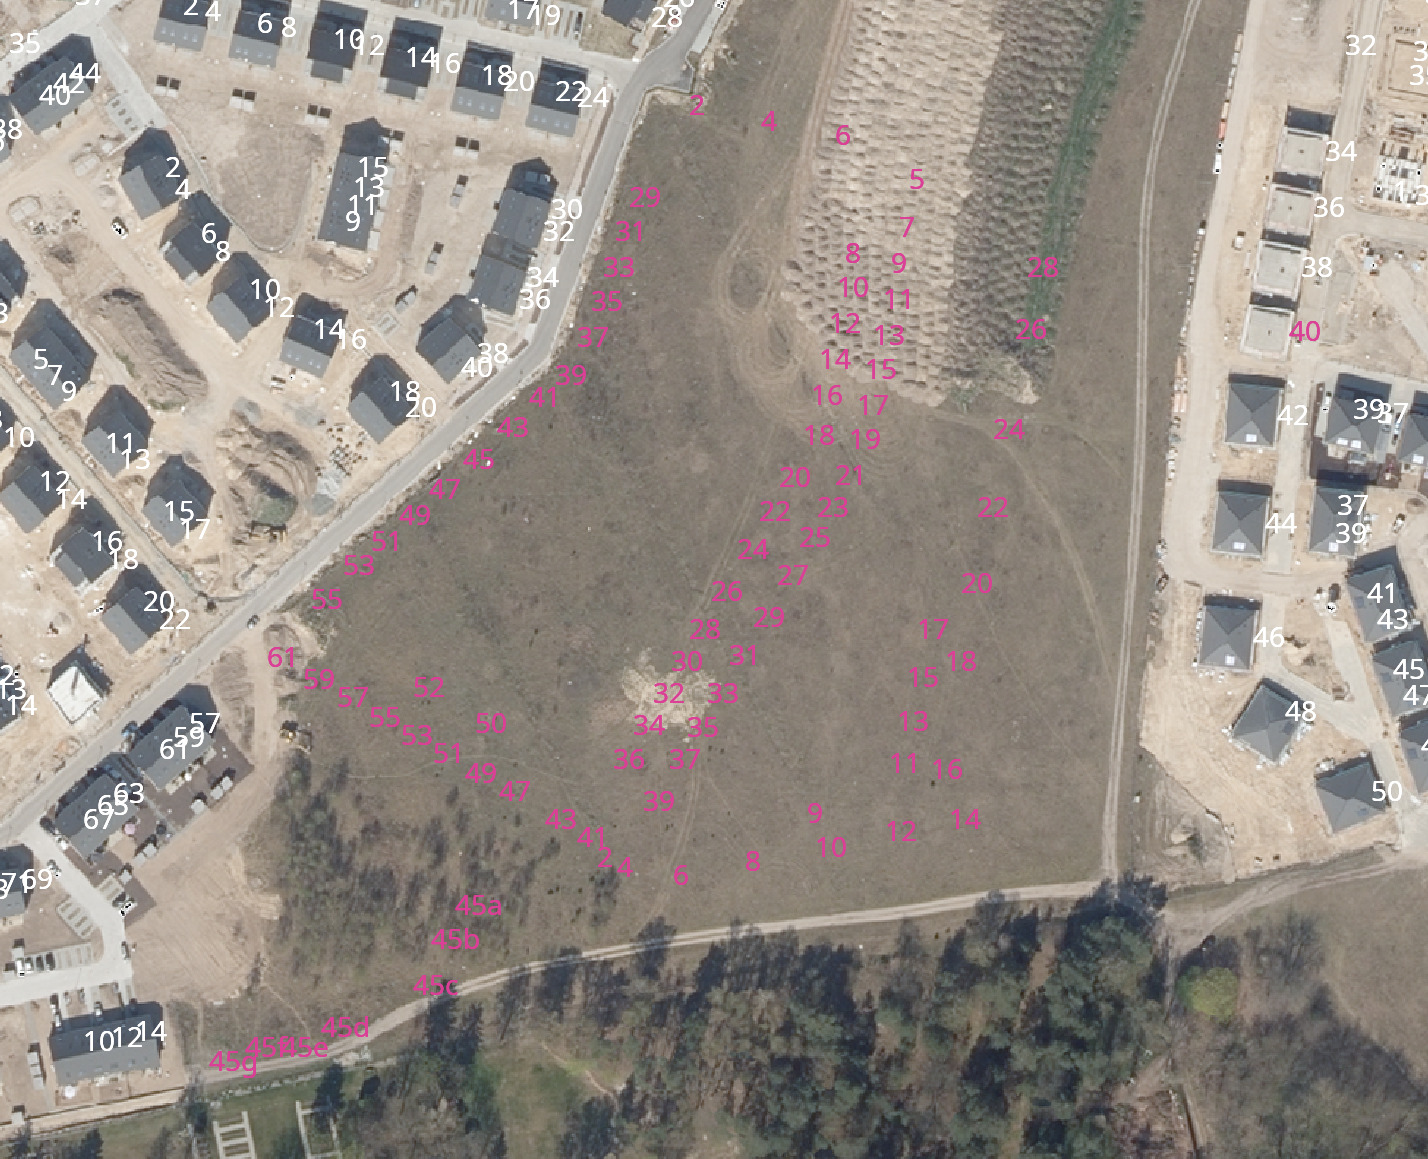 Aerial view of a new development area where no houses can be seen yet. Many house numbers are already officially allocated, but not yet recorded in OSM